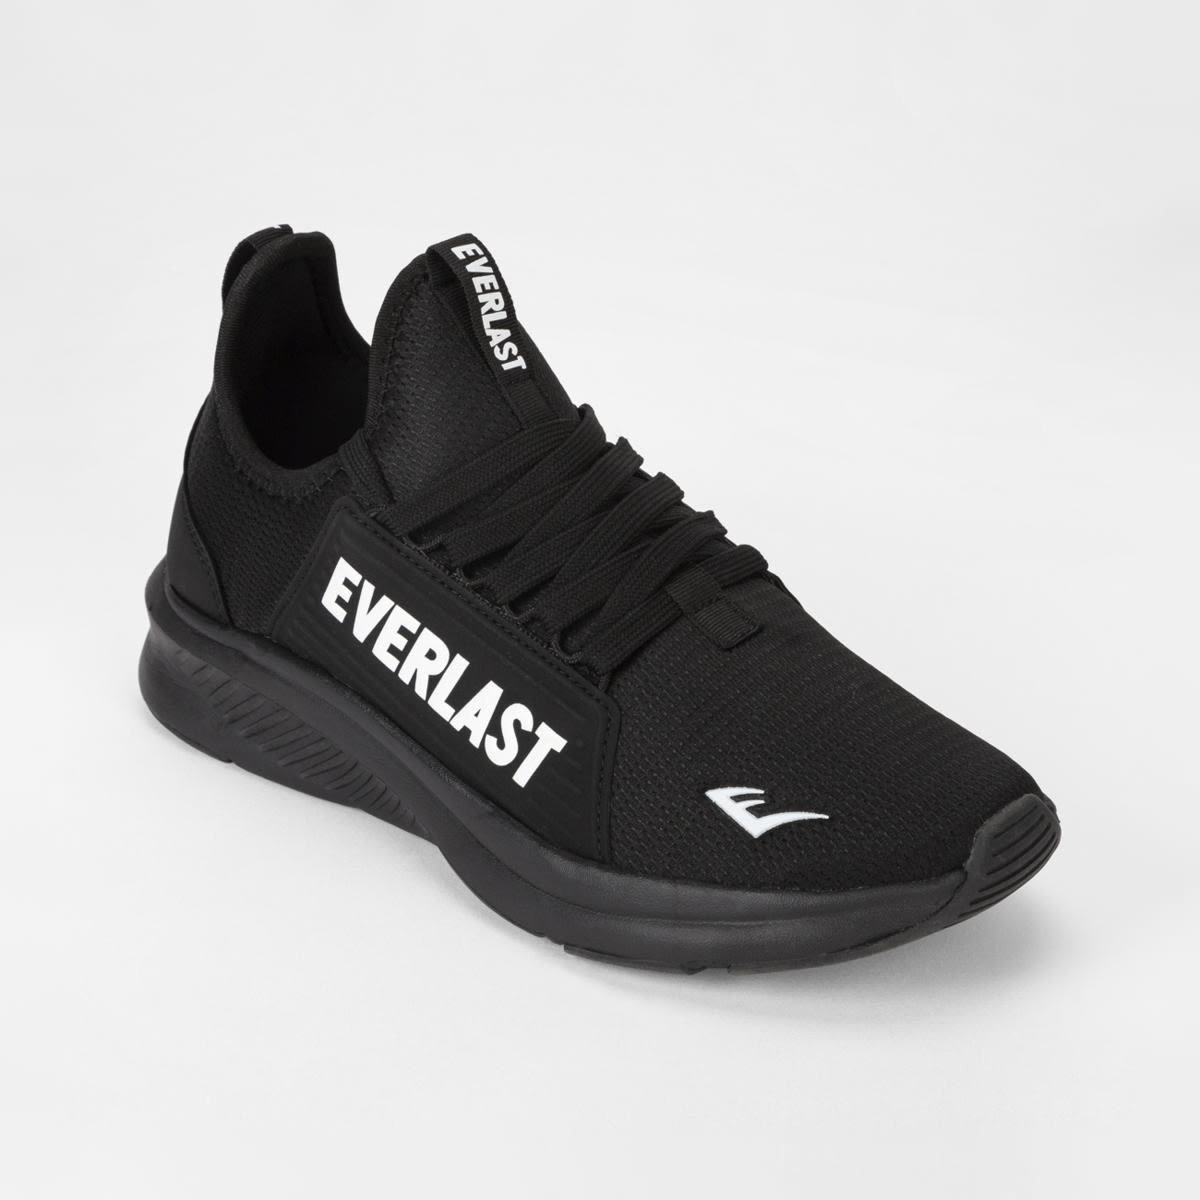 Everlast Active Training Shoes Deals | innoem.eng.psu.ac.th